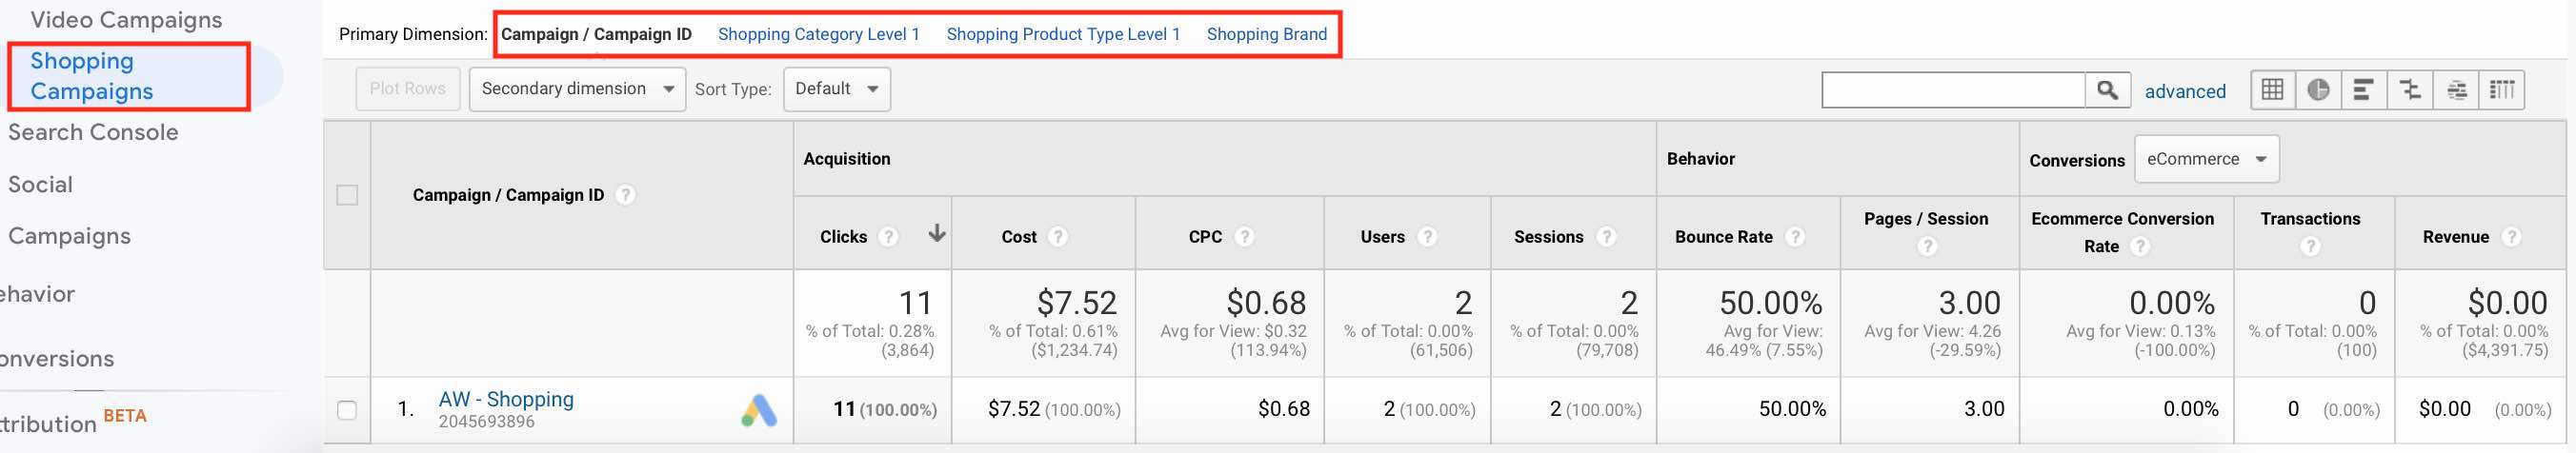 Shopping Campaign Report in Analytics